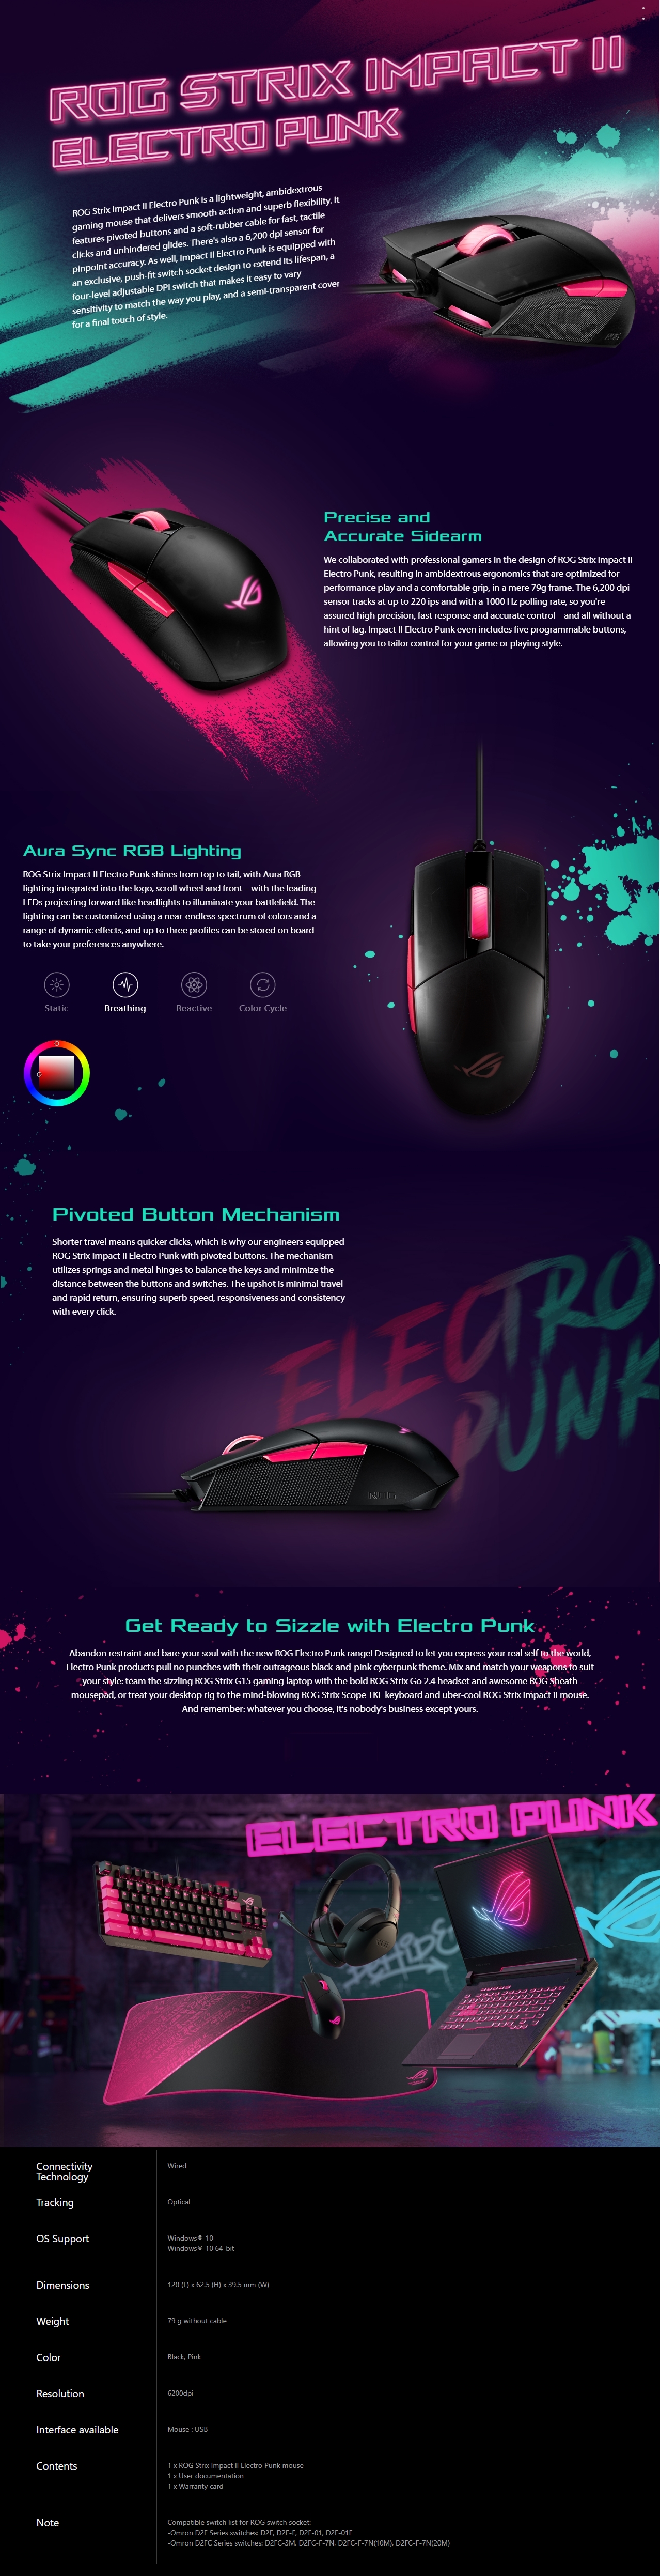 A large marketing image providing additional information about the product ASUS ROG STRIX Impact II Ambidextrous Lightweight Gaming Mouse - Electro Punk - Additional alt info not provided